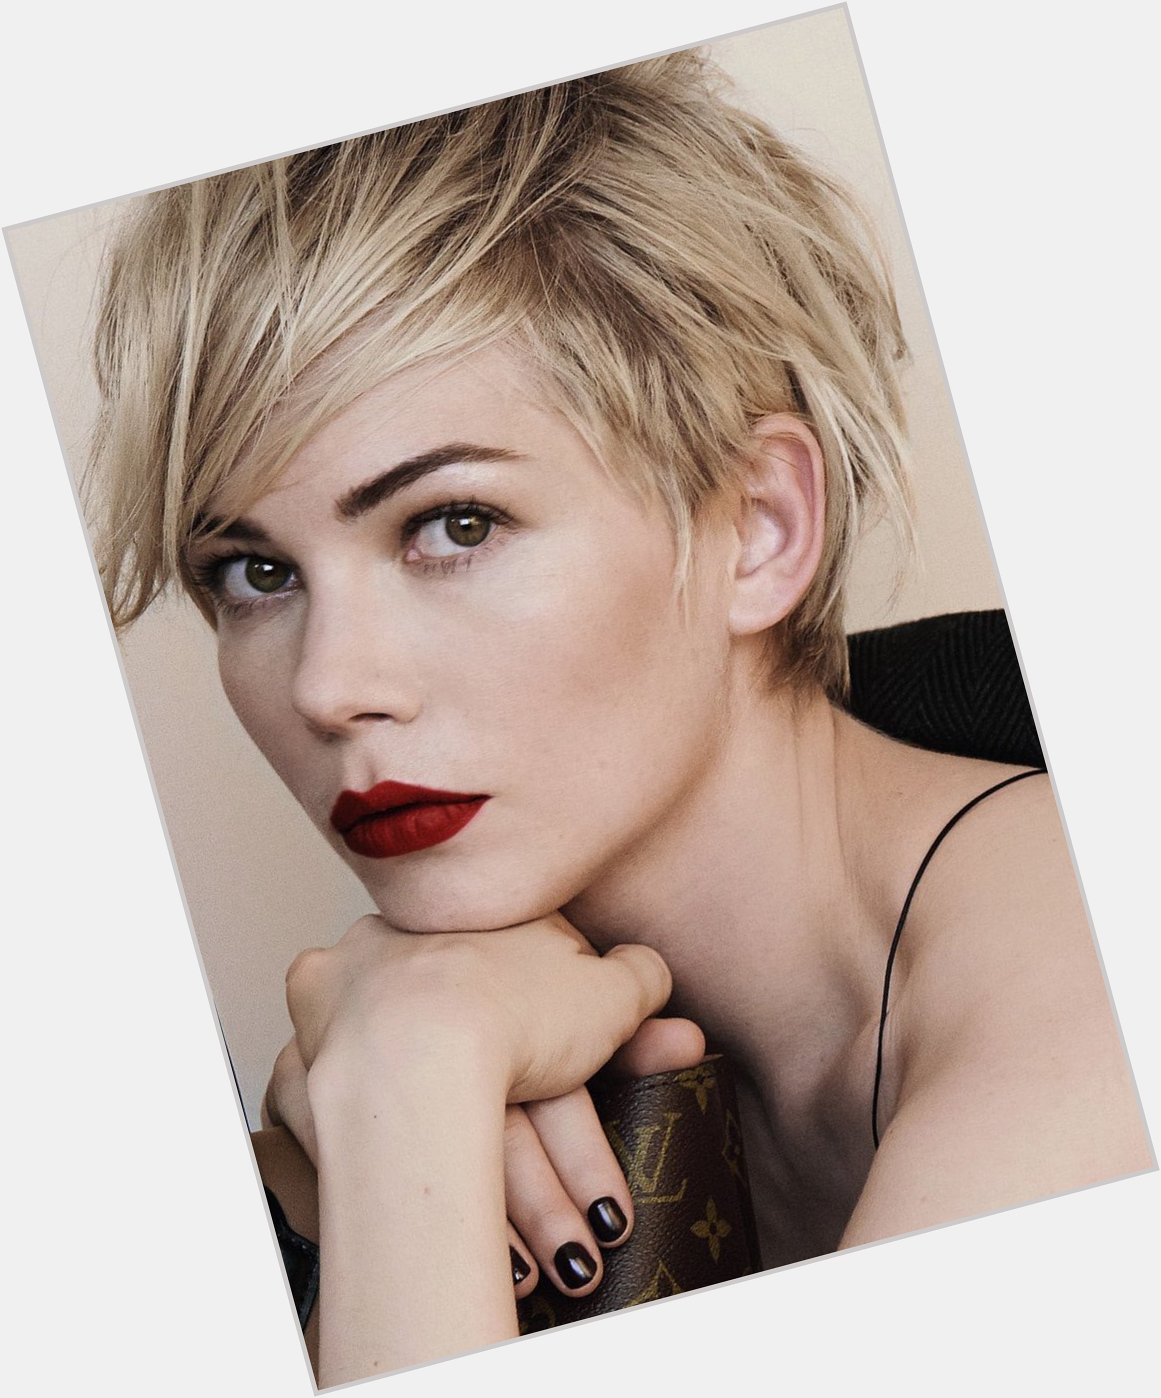 Happy 37th birthday to the talented Michelle Williams. Such a classic beauty - she blew me away in Blue Valentine! 